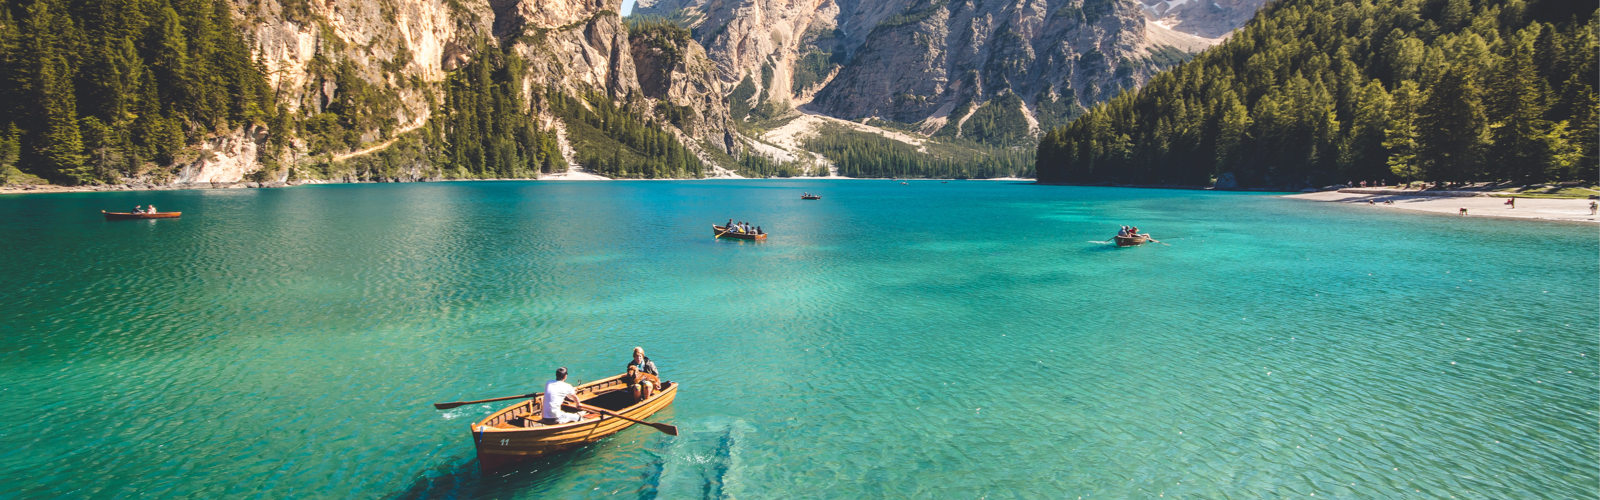 Five boats spread across a clear blue lake surrounded by mountains and evergreen trees.